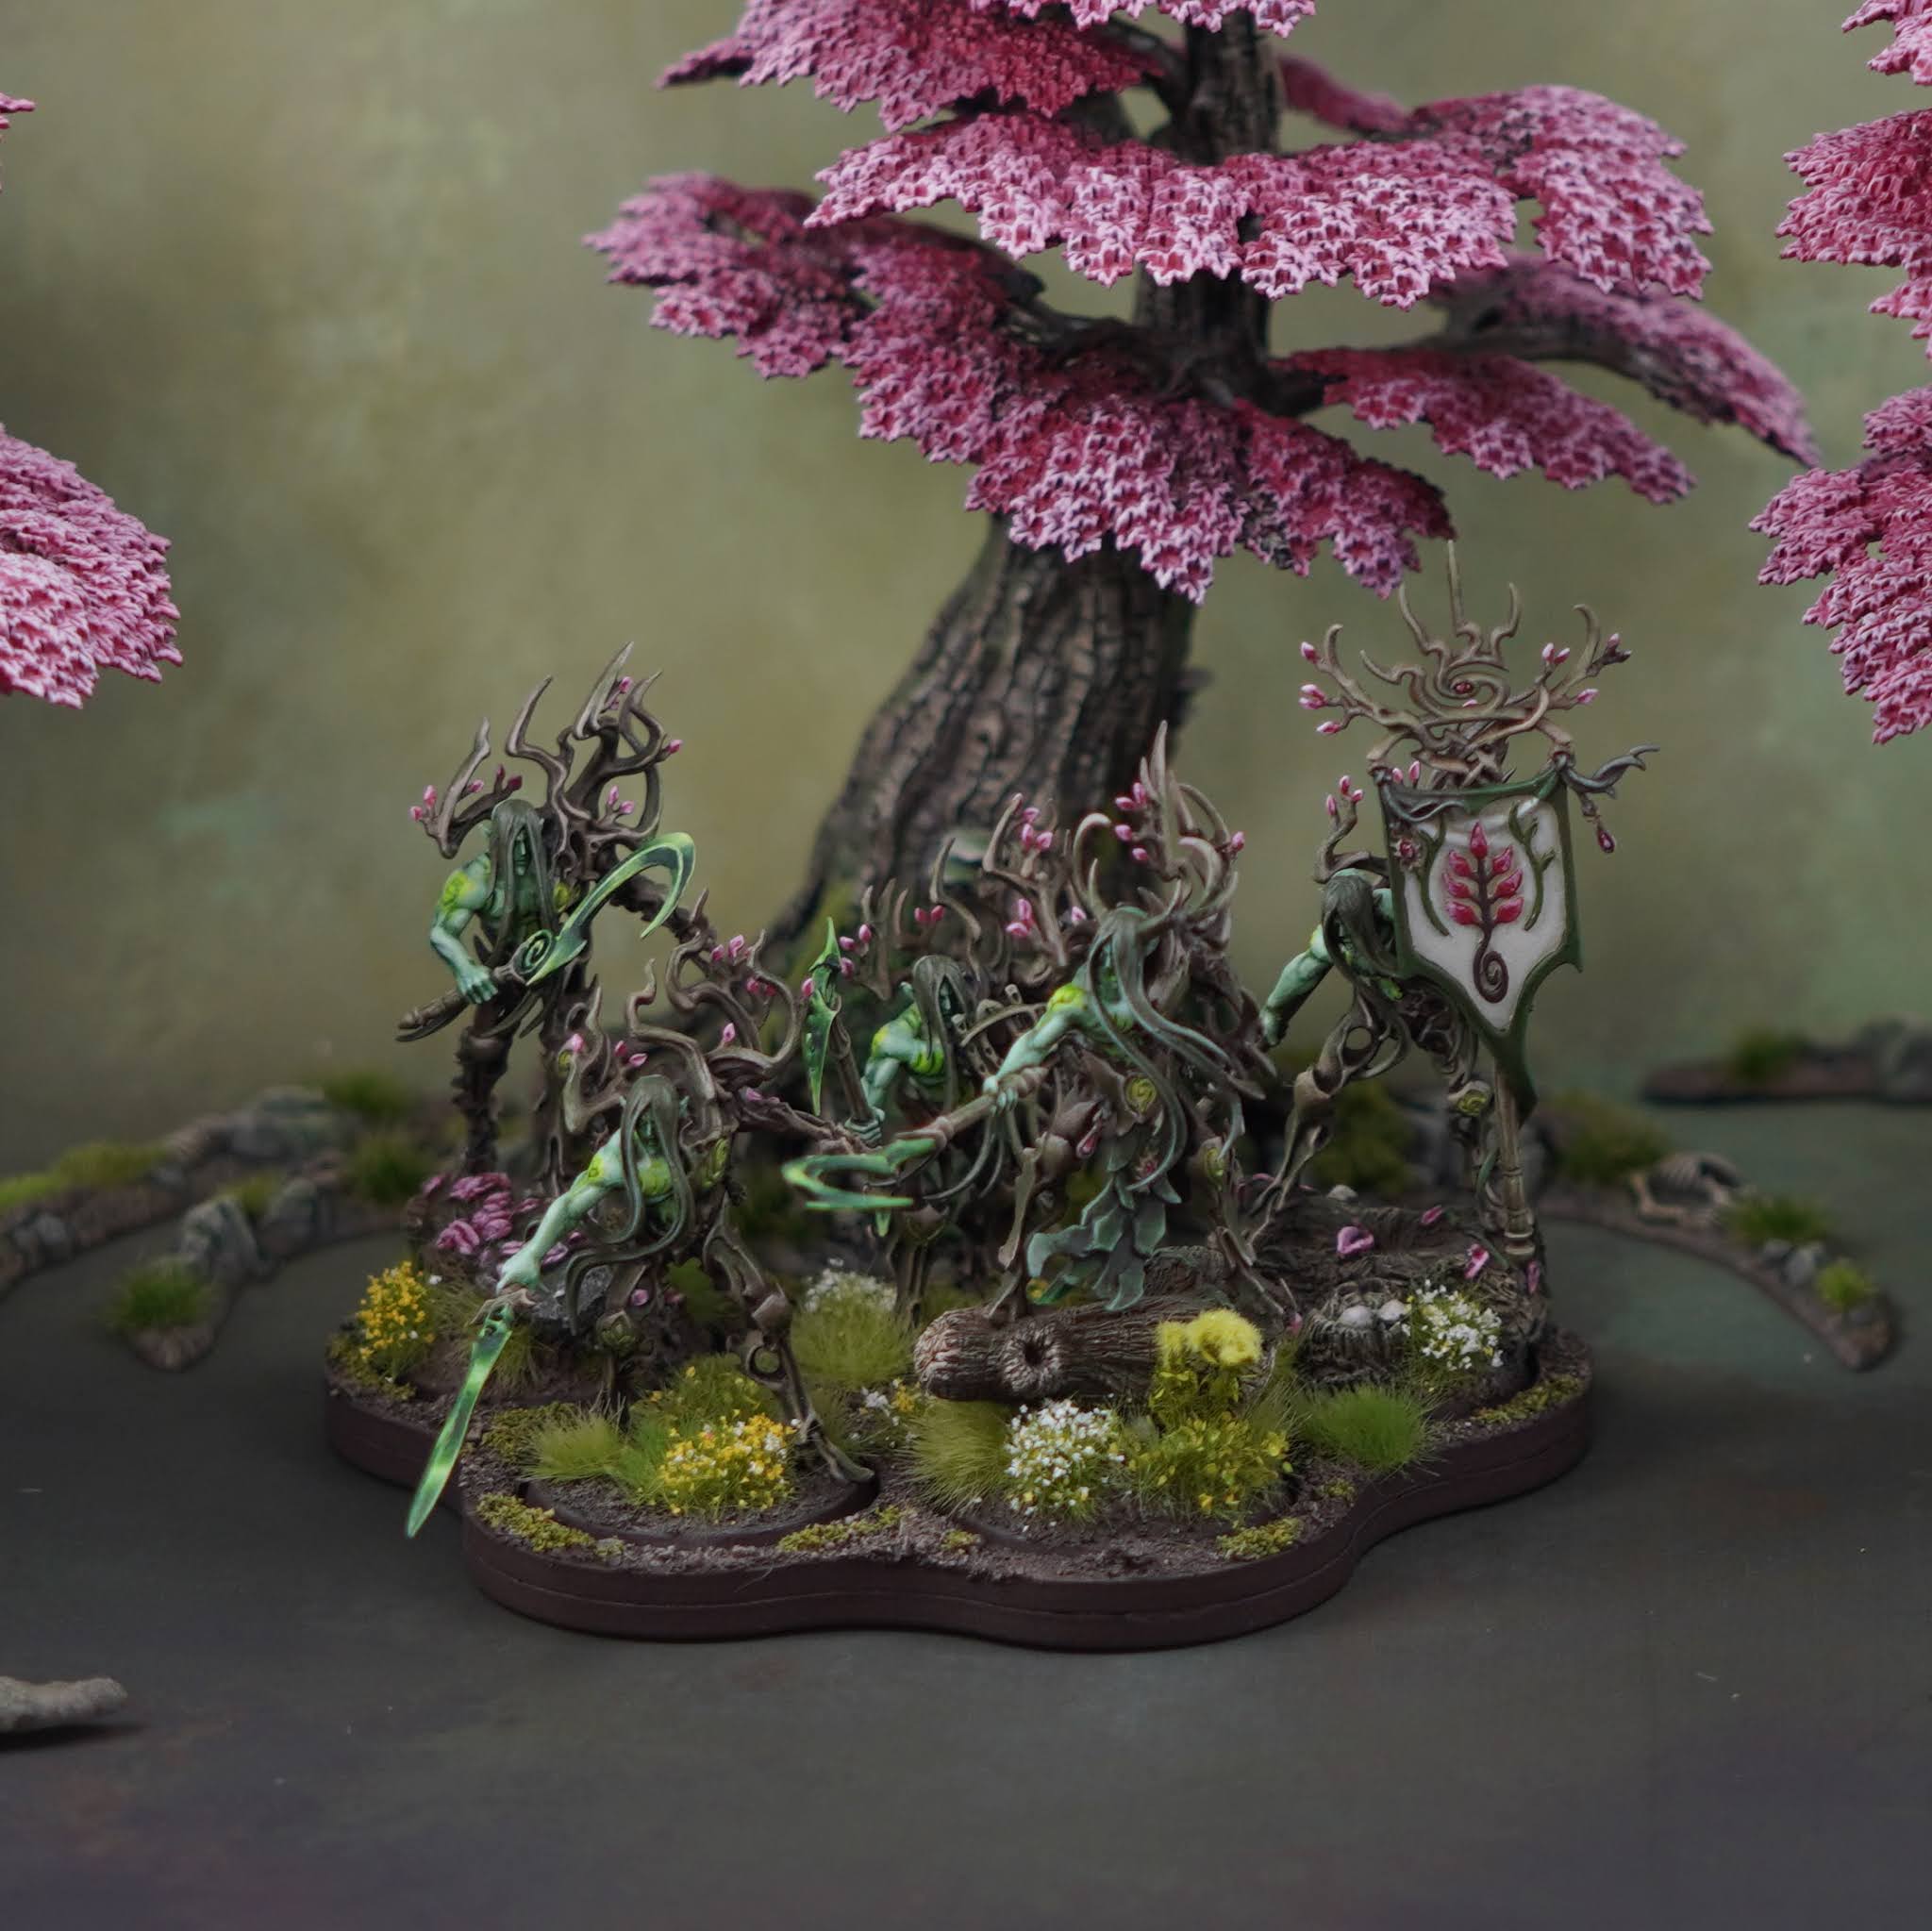 The Sylvaneth of the Cherry Blossom Grove